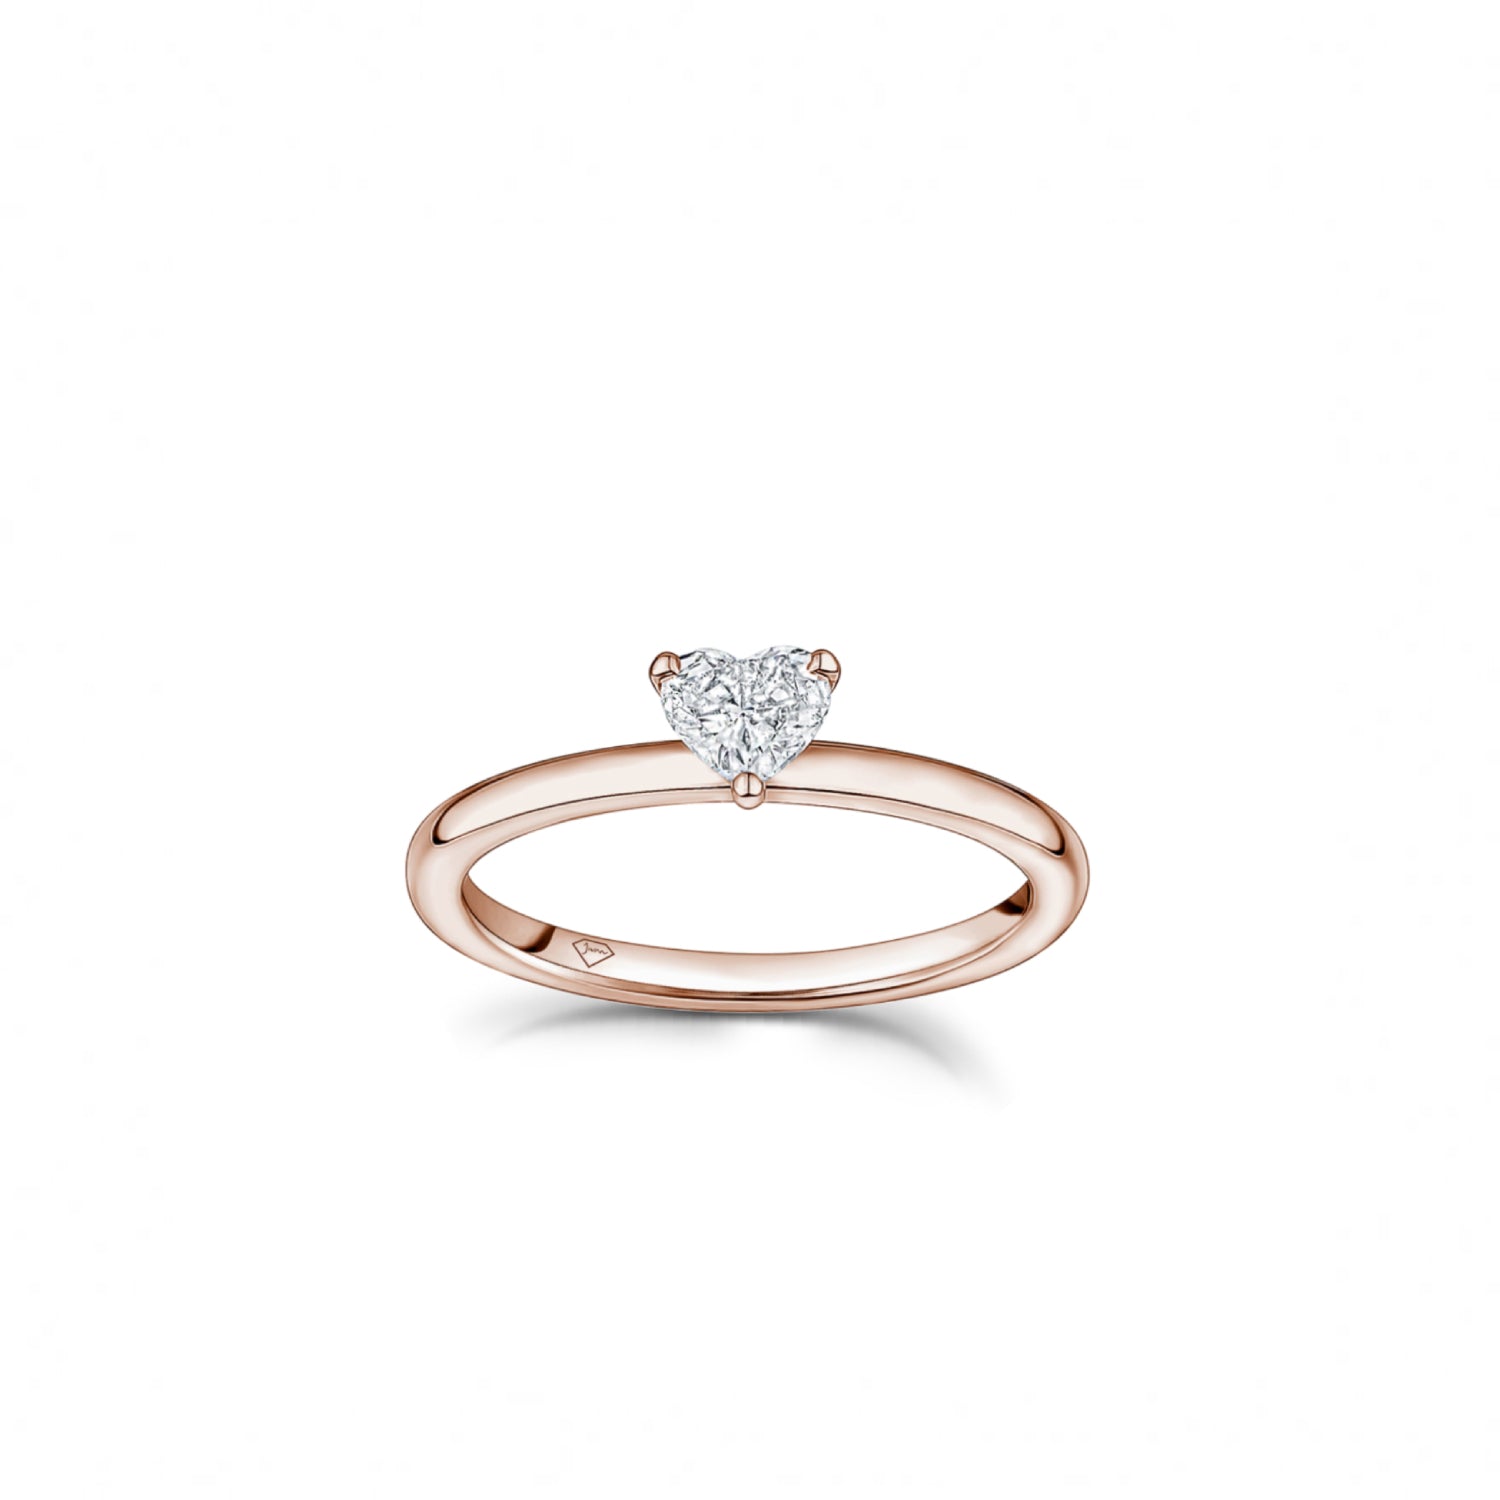 Heart-Shaped Diamond Solitaire Engagement Ring in Rose Gold